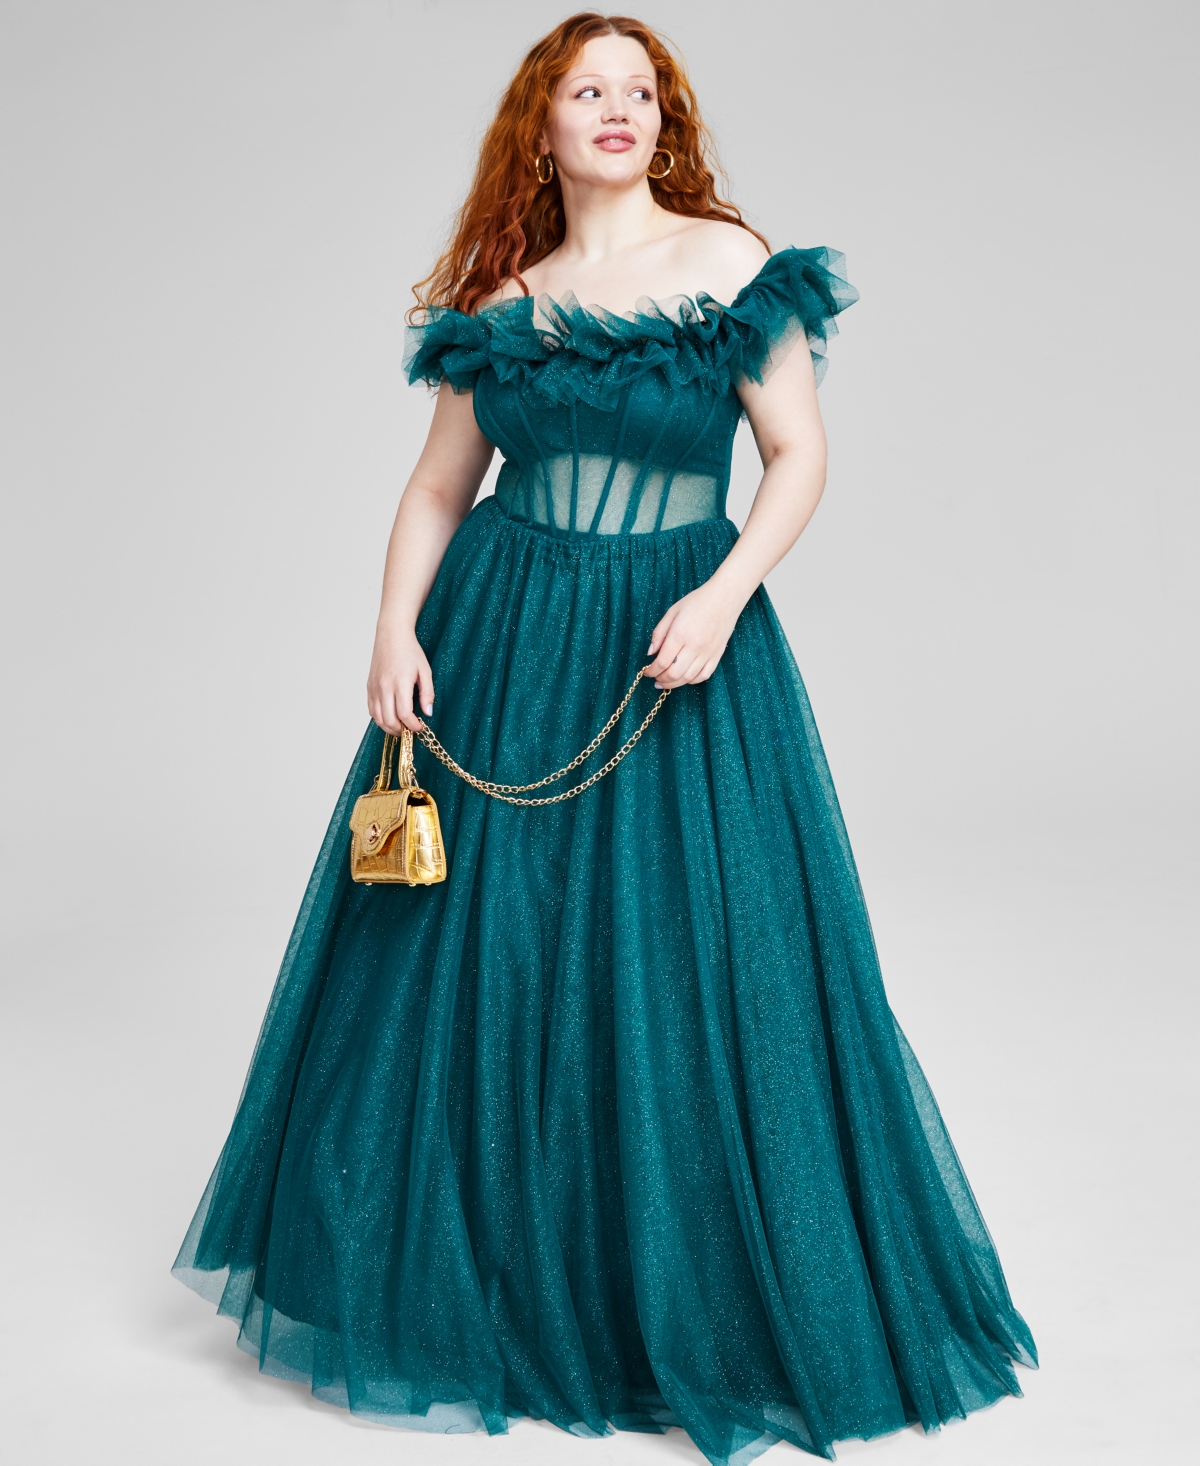 Trendy Plus Size Off-The-Shoulder Tulle Gown, Created for Macy's - Jade